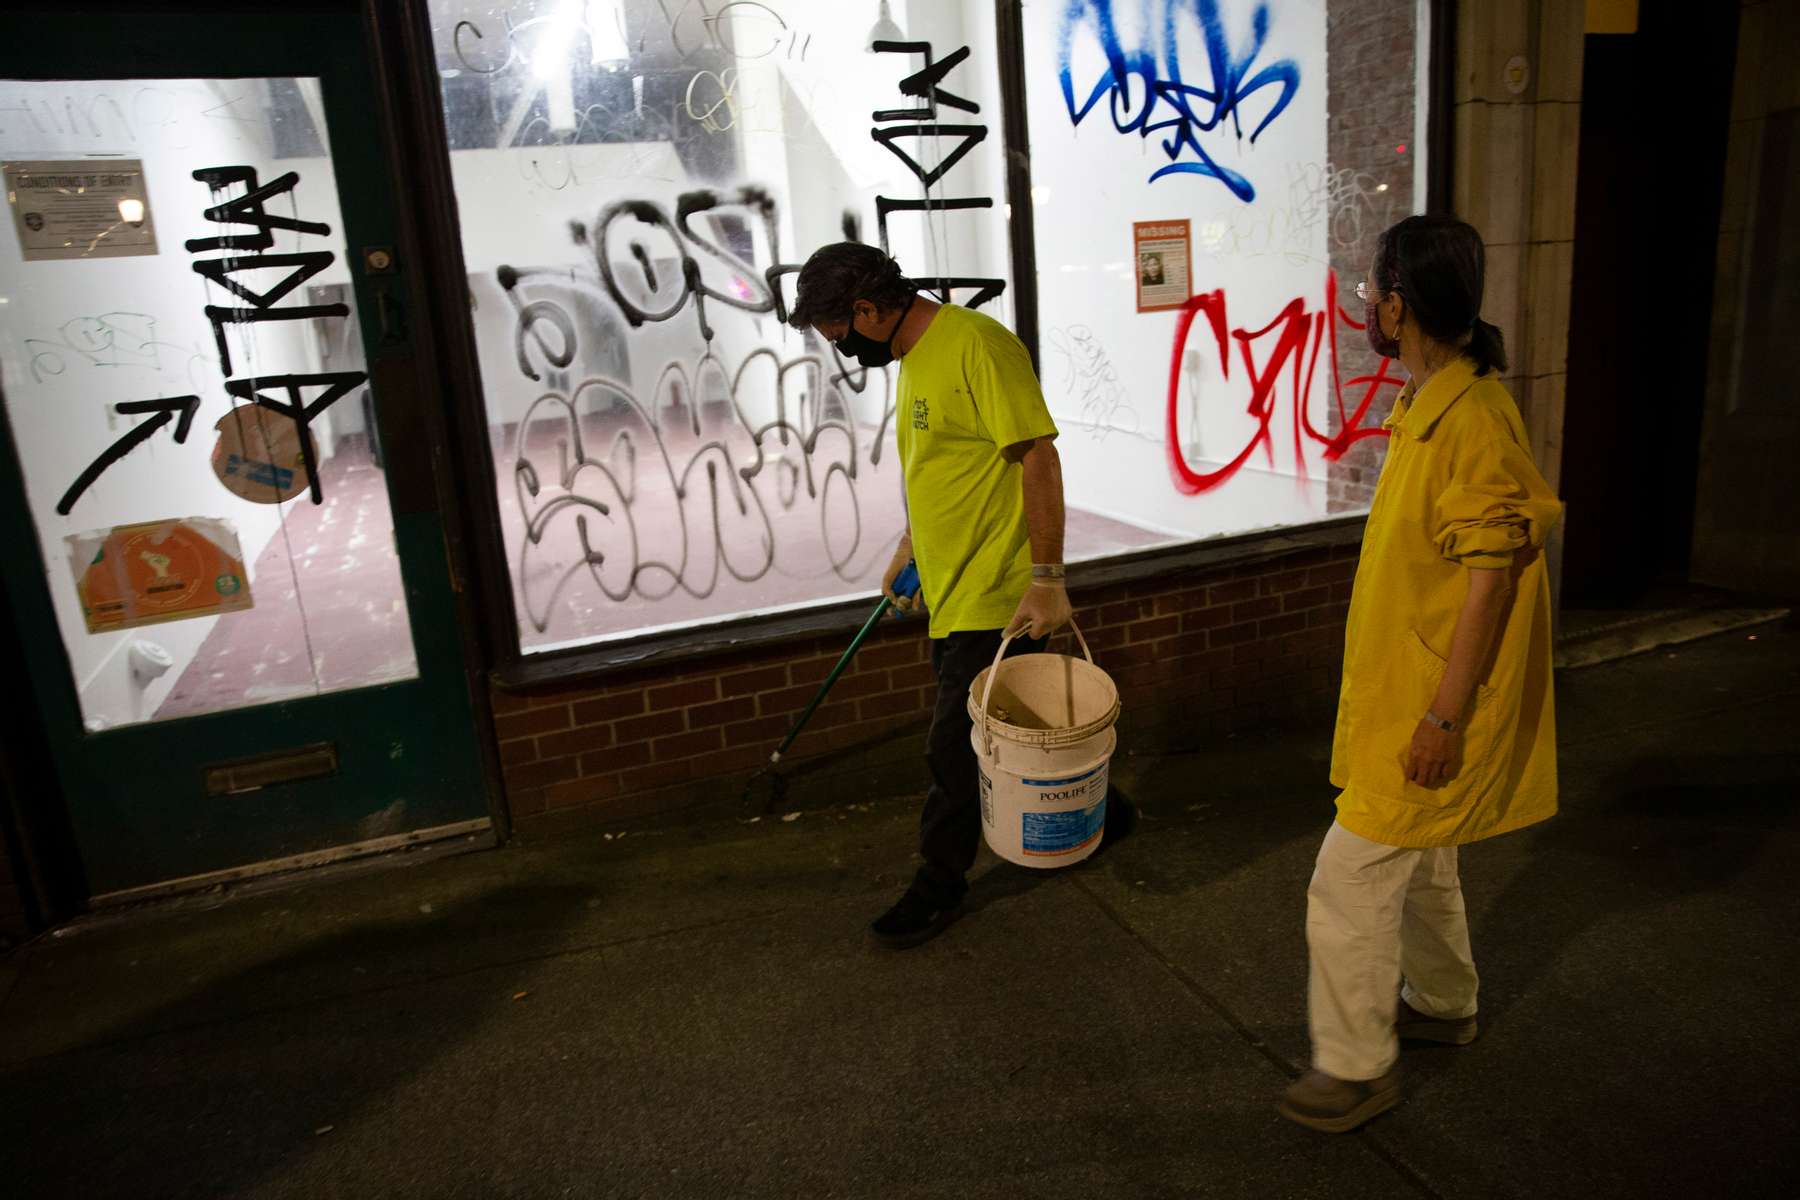 Volunteers of the night watch group in the Chinatown - International District in Seattle, Washington on July 20, 2020. The group numbers between 6 - a dozen volunteers a night who patrol the neighborhood  (Photo by Karen Ducey)